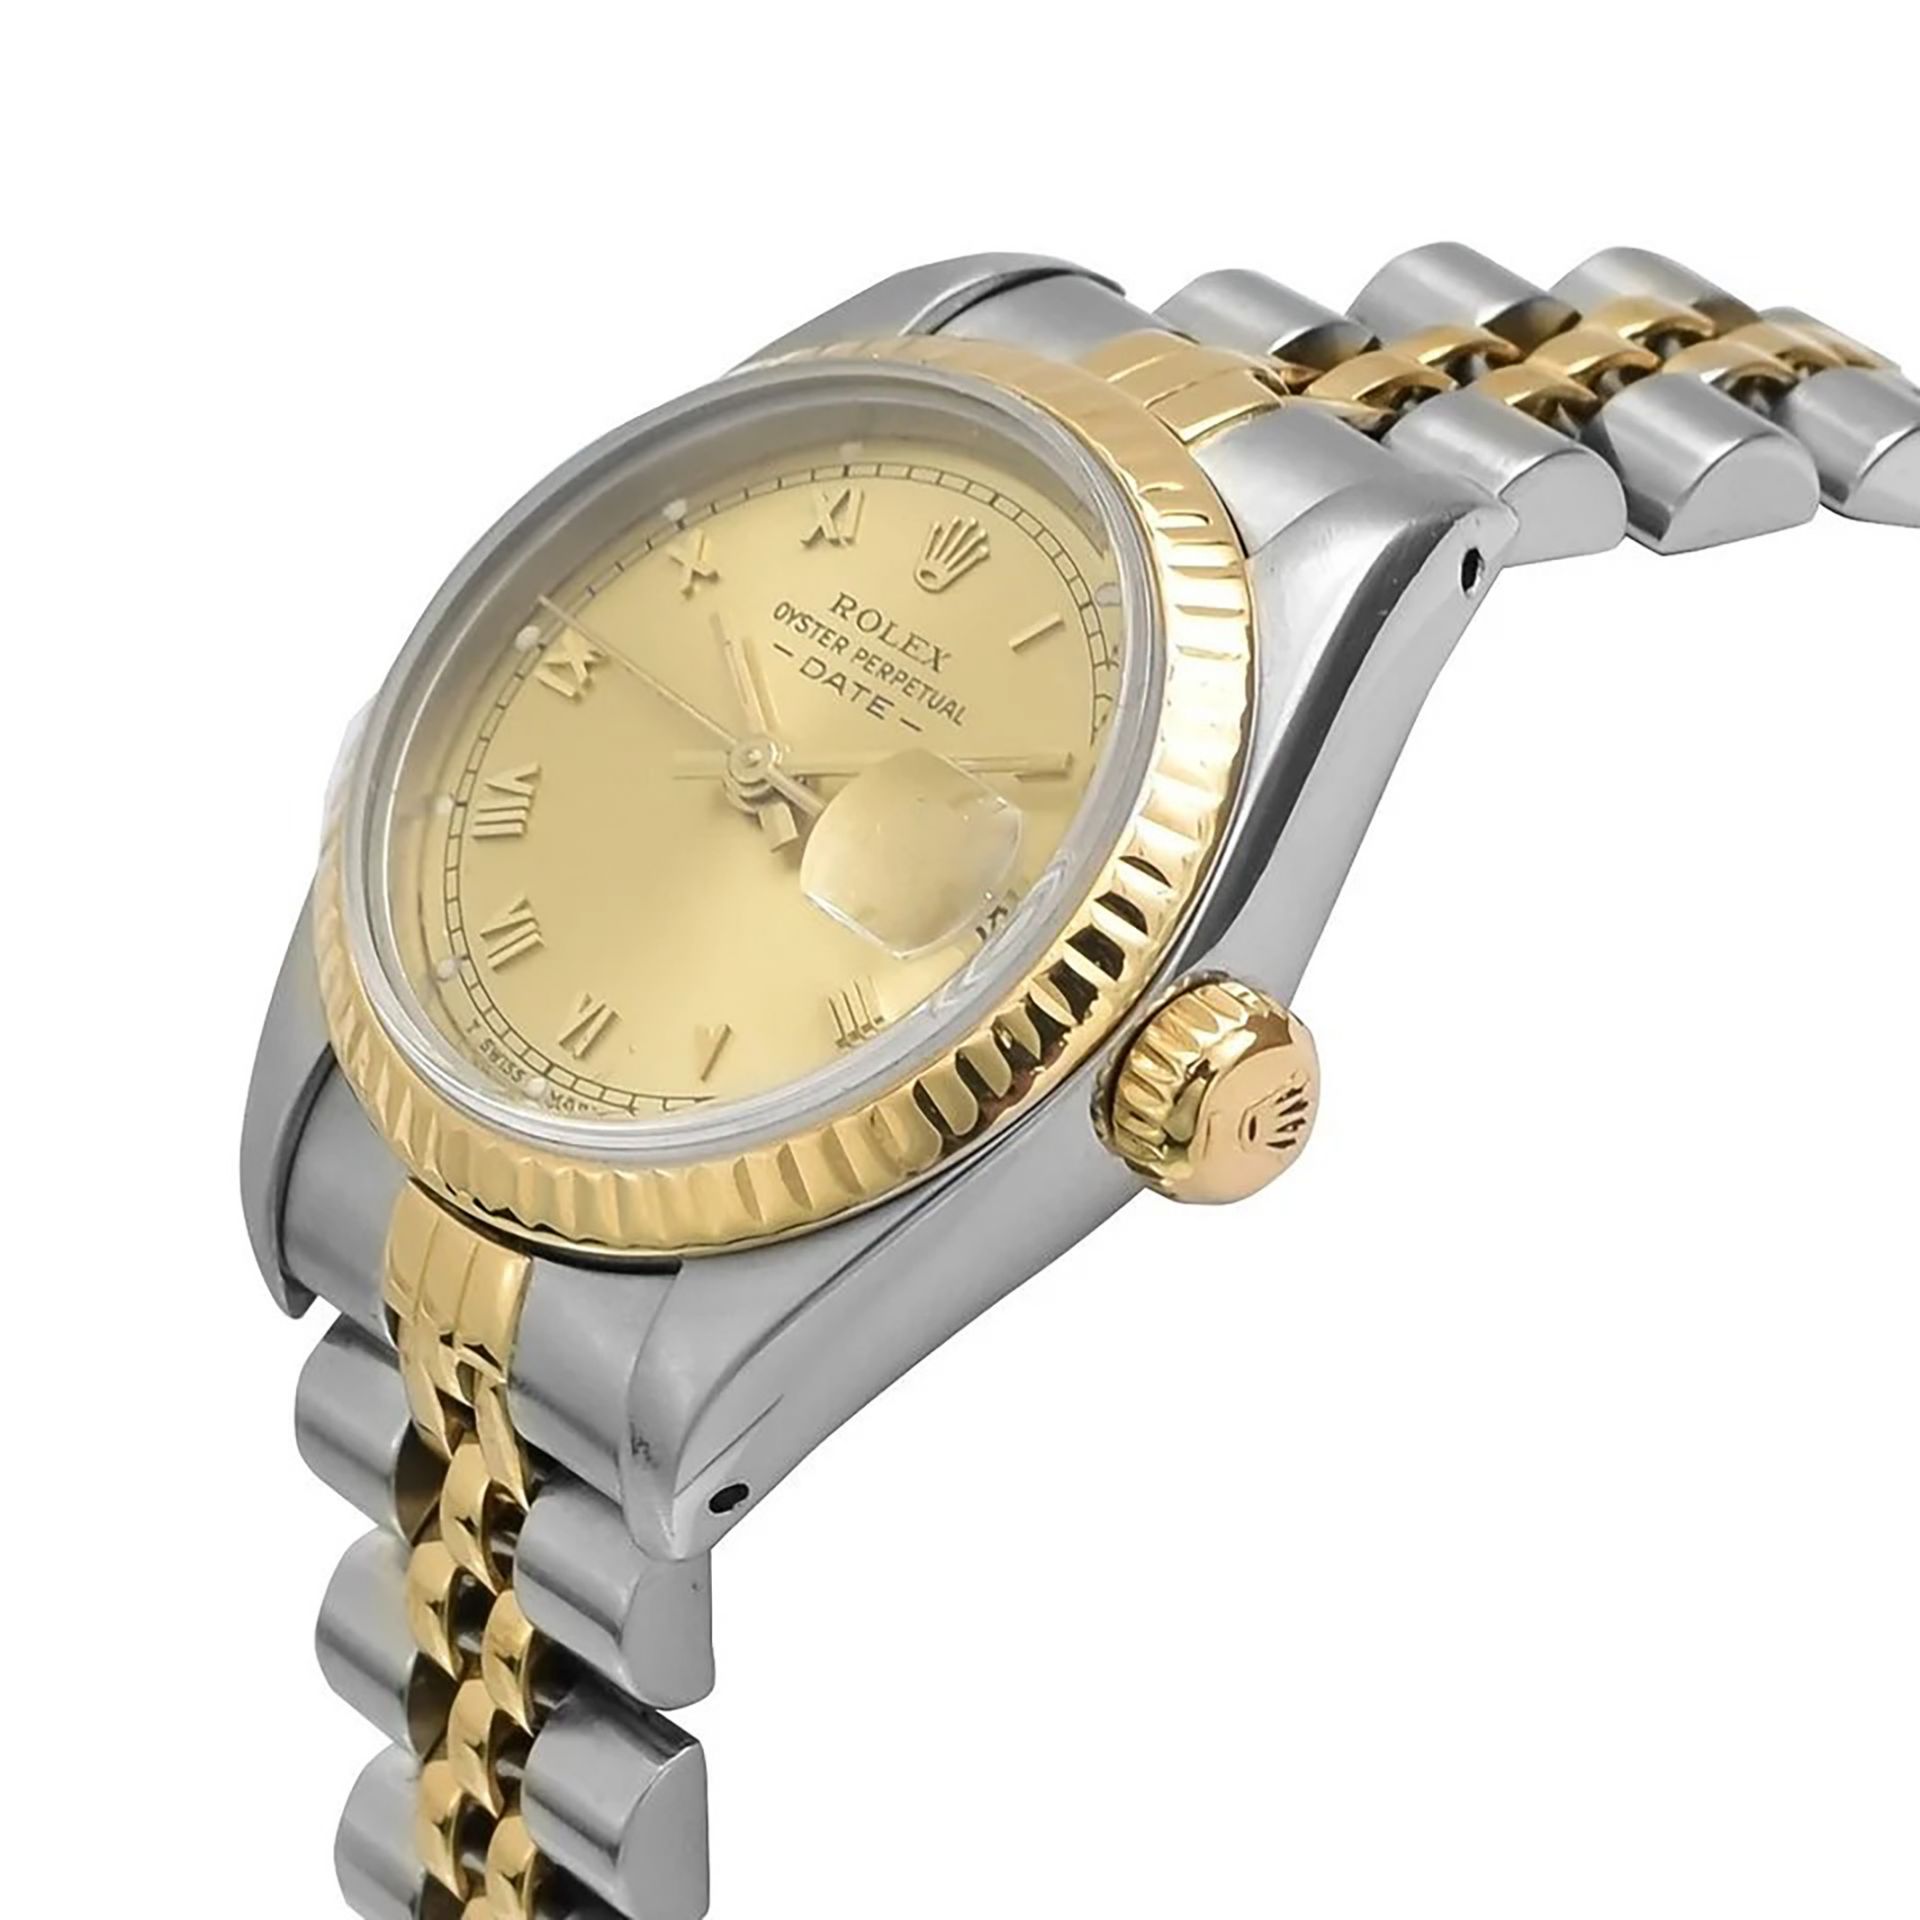 Vintage Rolex Lady Date wristwatch in steel and gold - Image 2 of 6